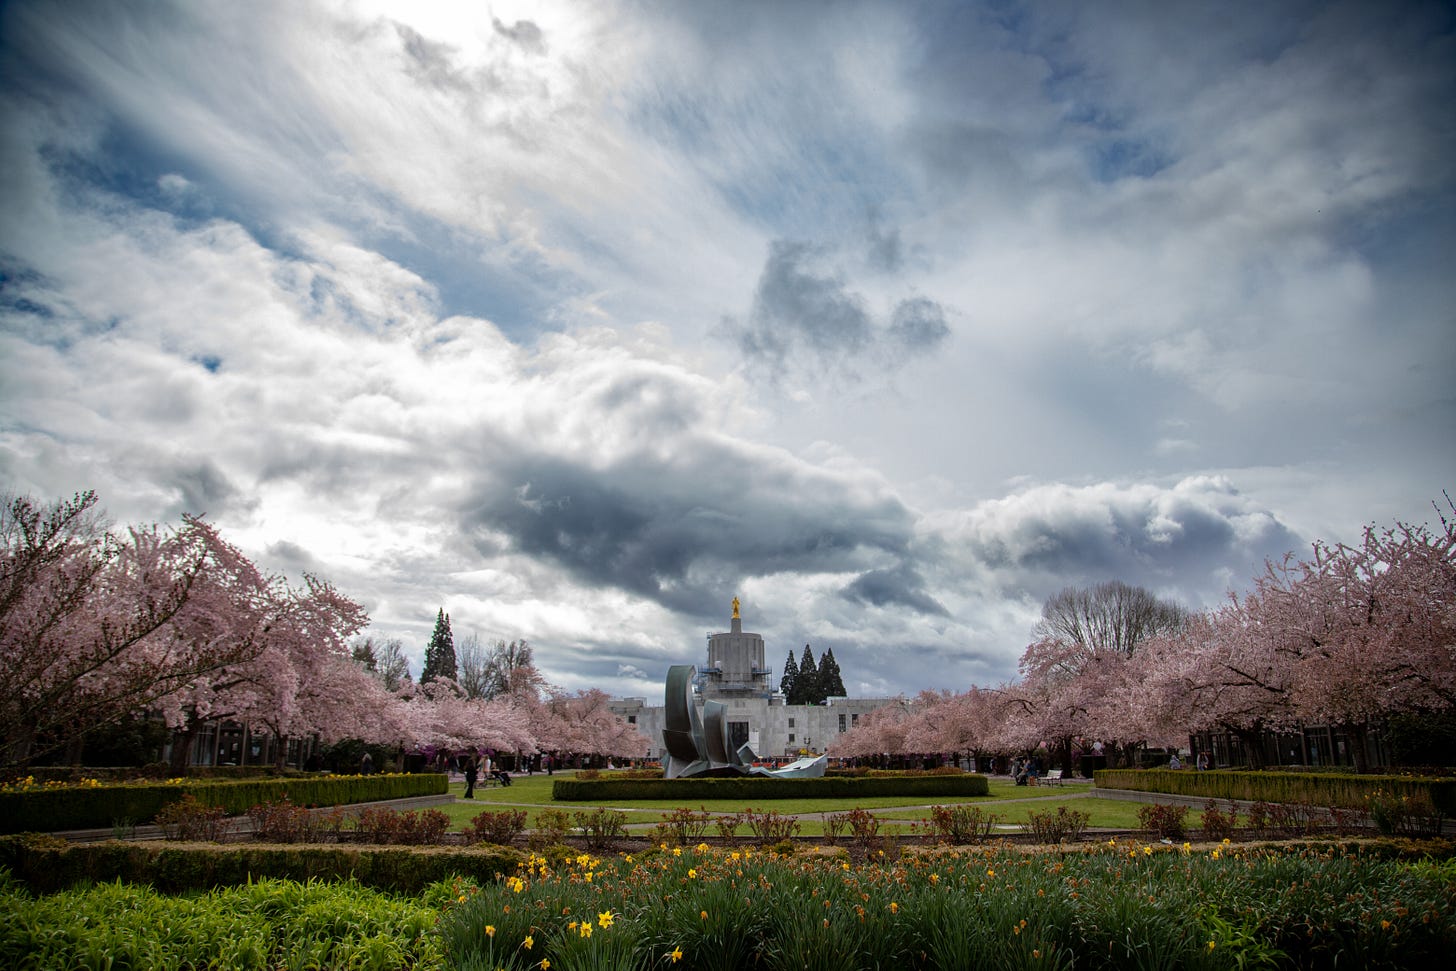   Oregon State Capitol Grounds in March full of blooms and a vivid sky